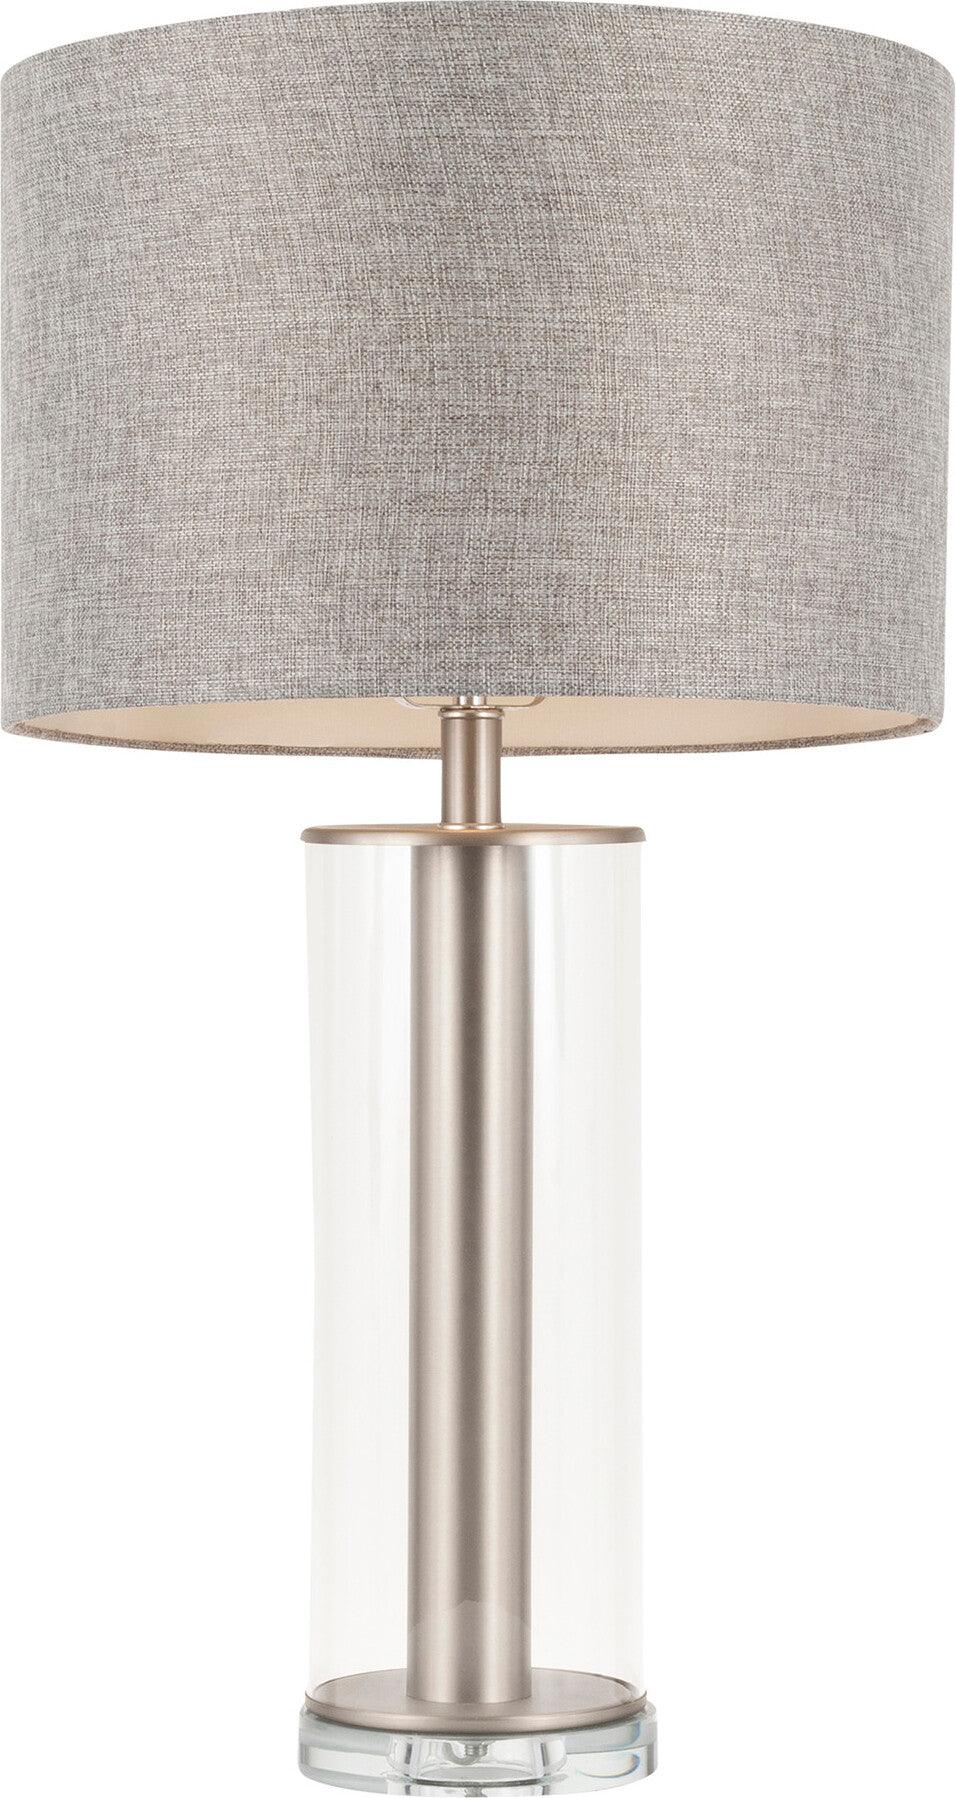 Lumisource Table Lamps - Glacier Table Lamp Brushed Nickel & Gray